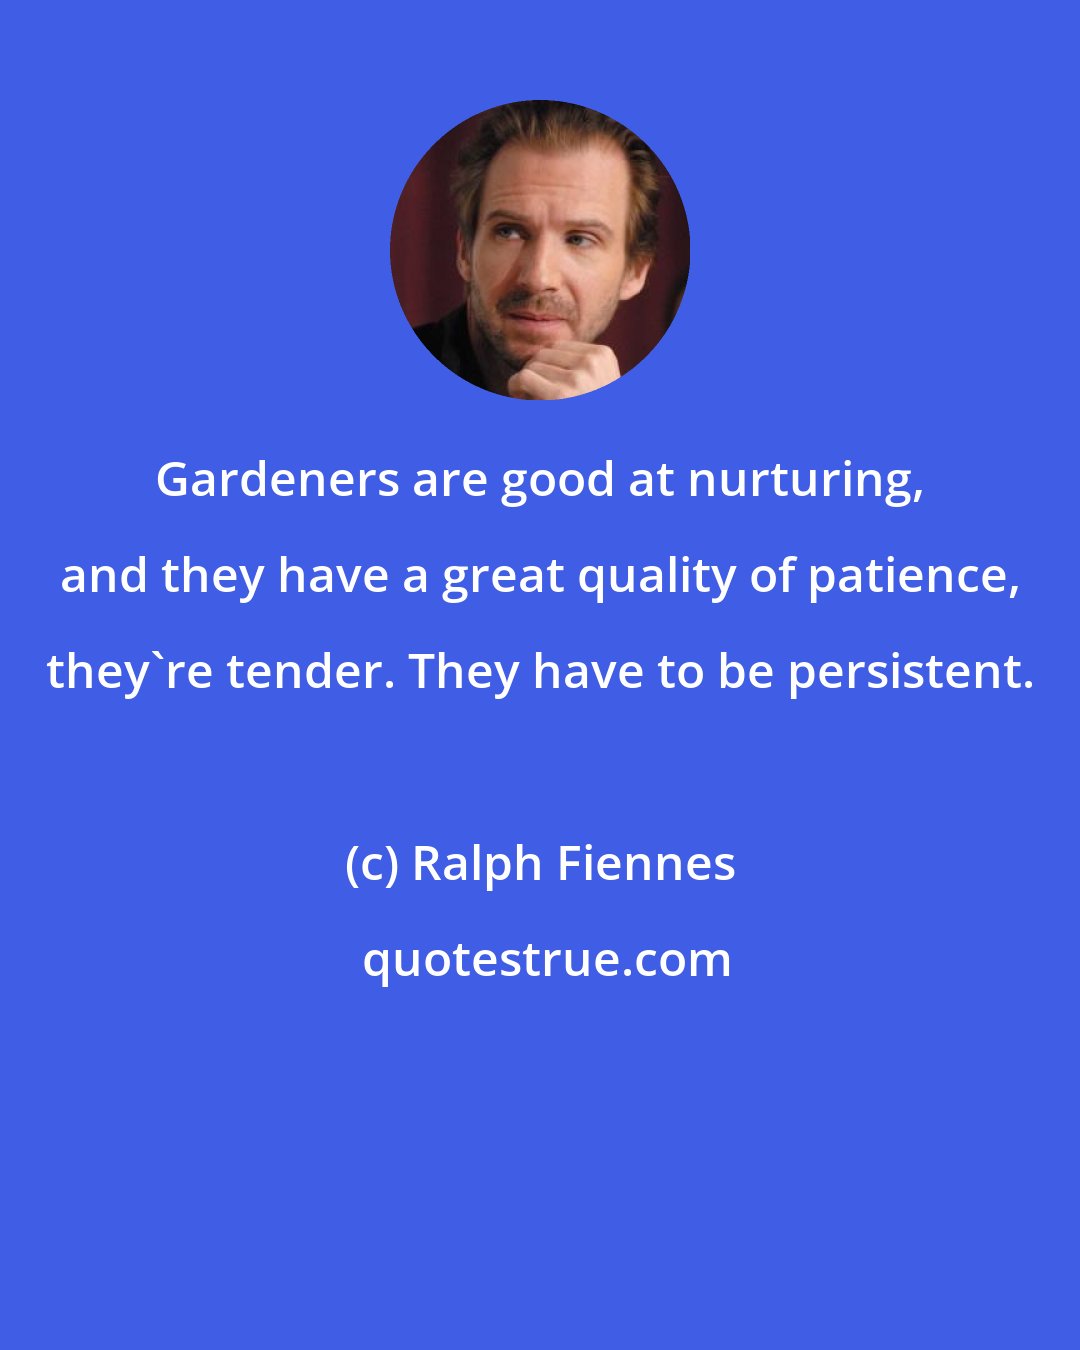 Ralph Fiennes: Gardeners are good at nurturing, and they have a great quality of patience, they're tender. They have to be persistent.